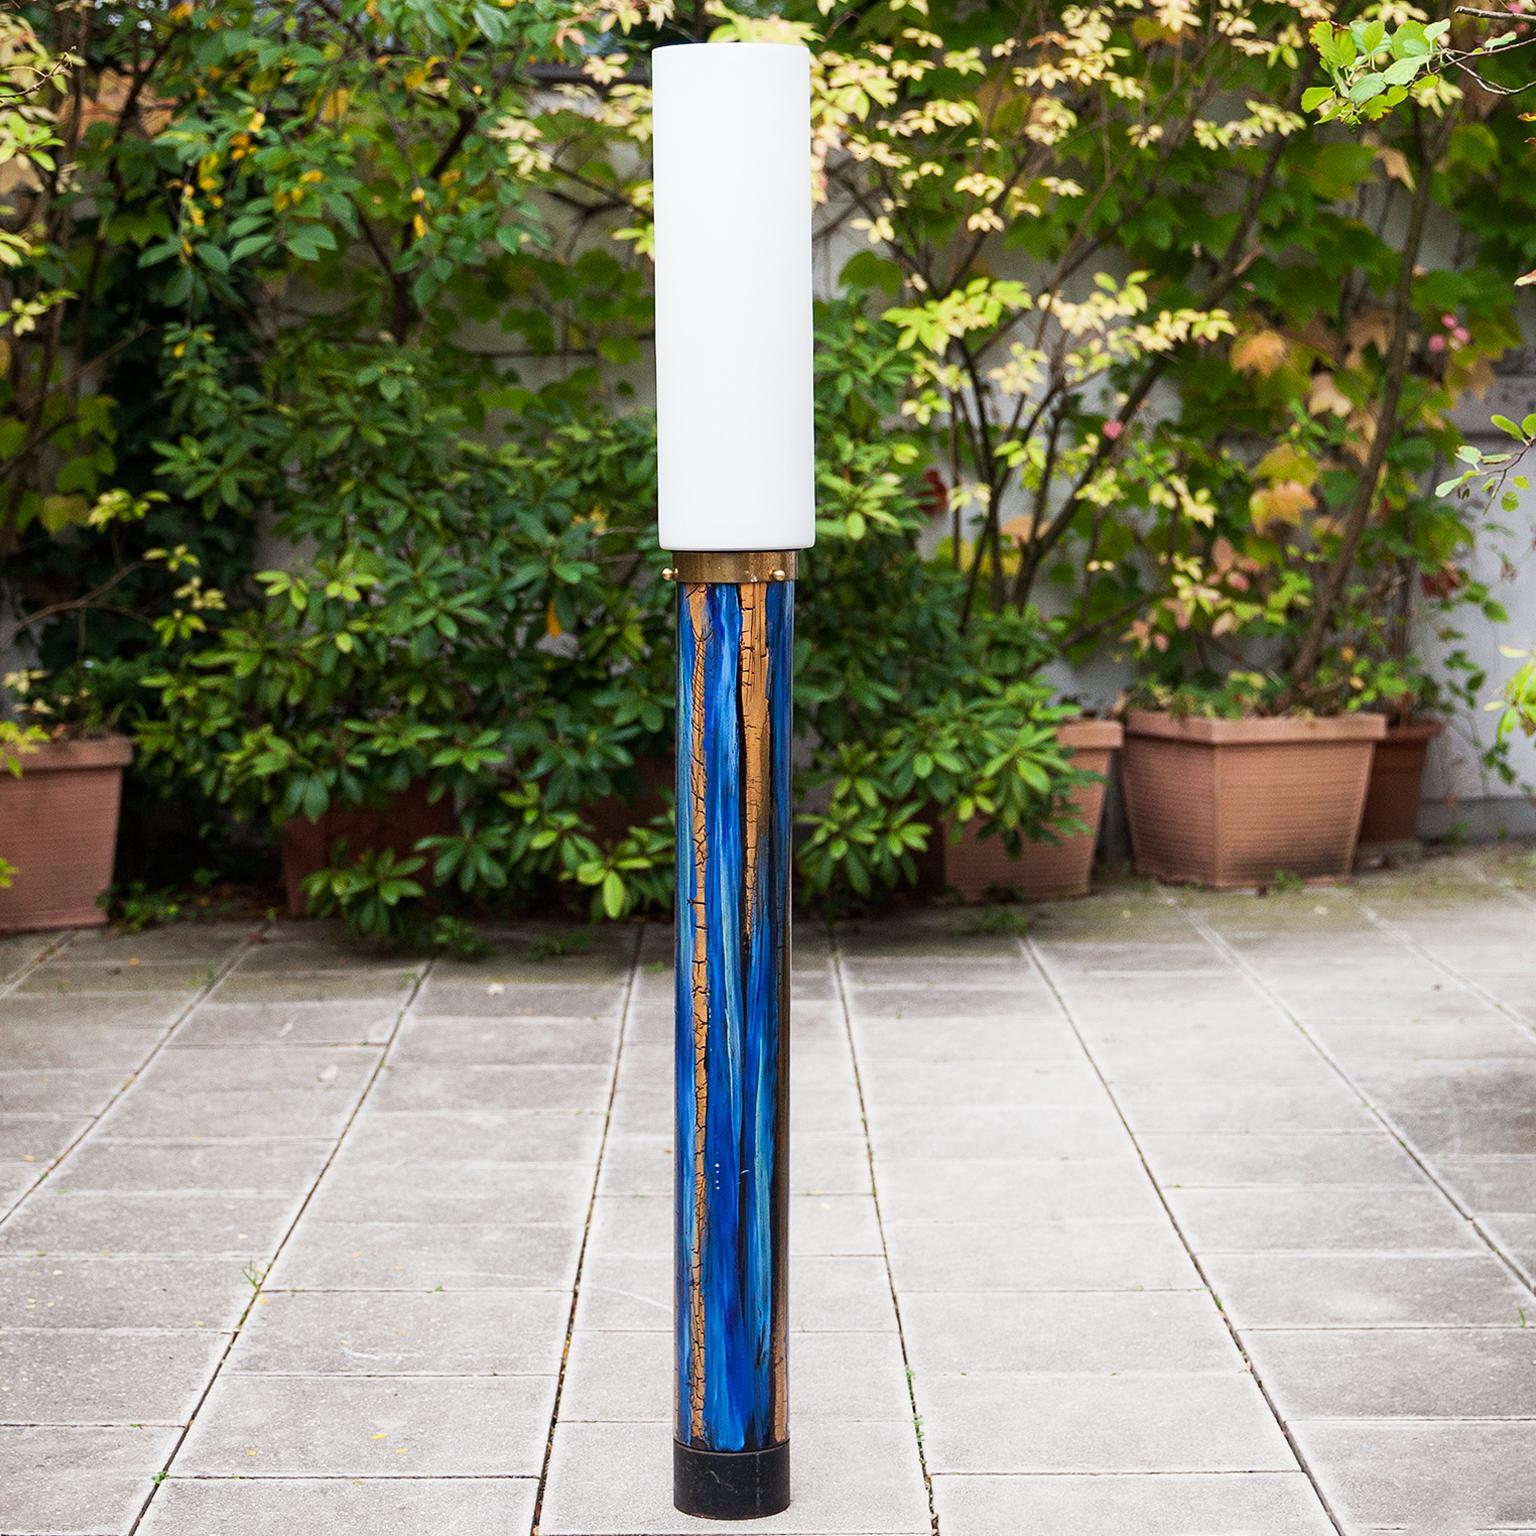 Angelo Brotto tube floor lamp made in enamel copper, brass and a reflector in curved glass, for Esperia in the 1960s.